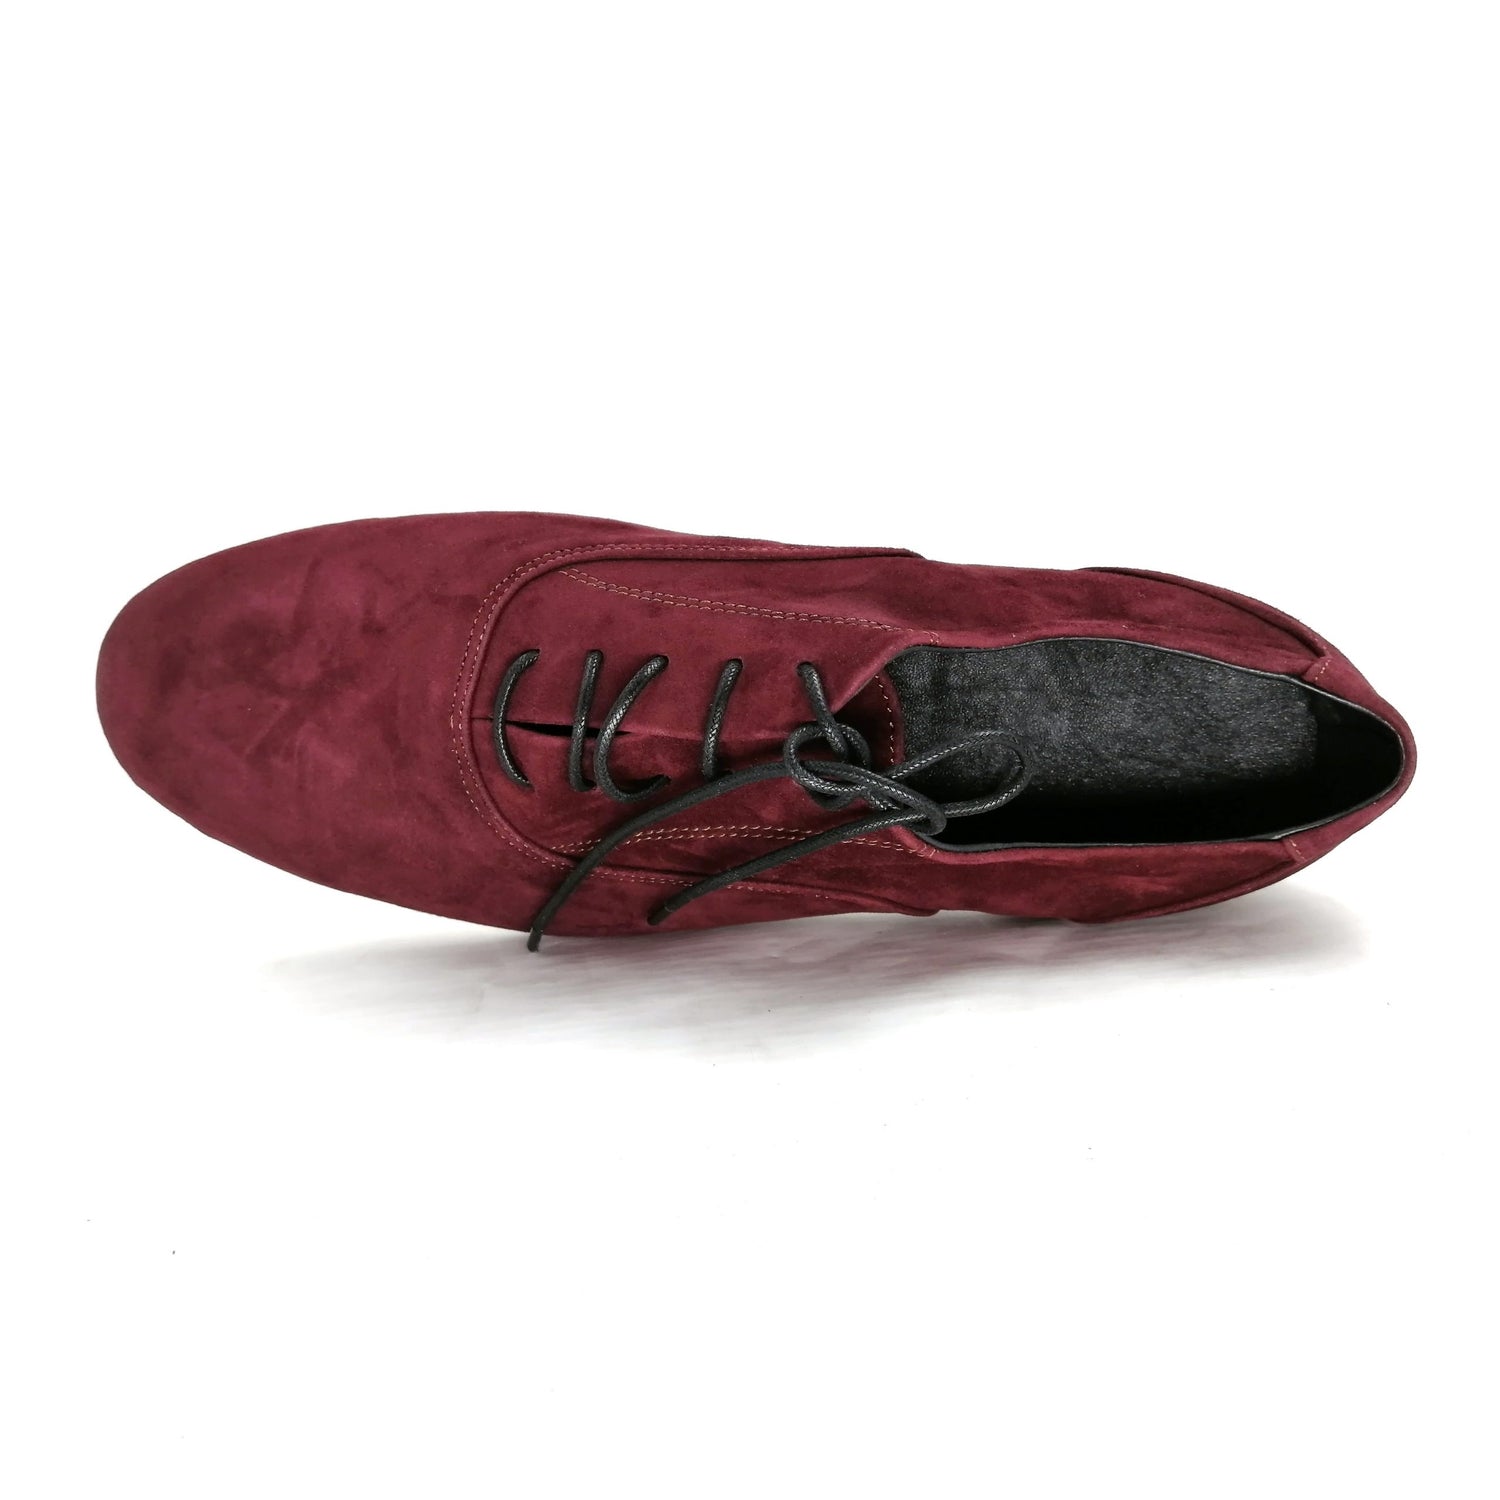 Men's Pro Dancer Argentine Tango Shoes with 1 inch Leather Heel and Lace-up in Brownish Red5